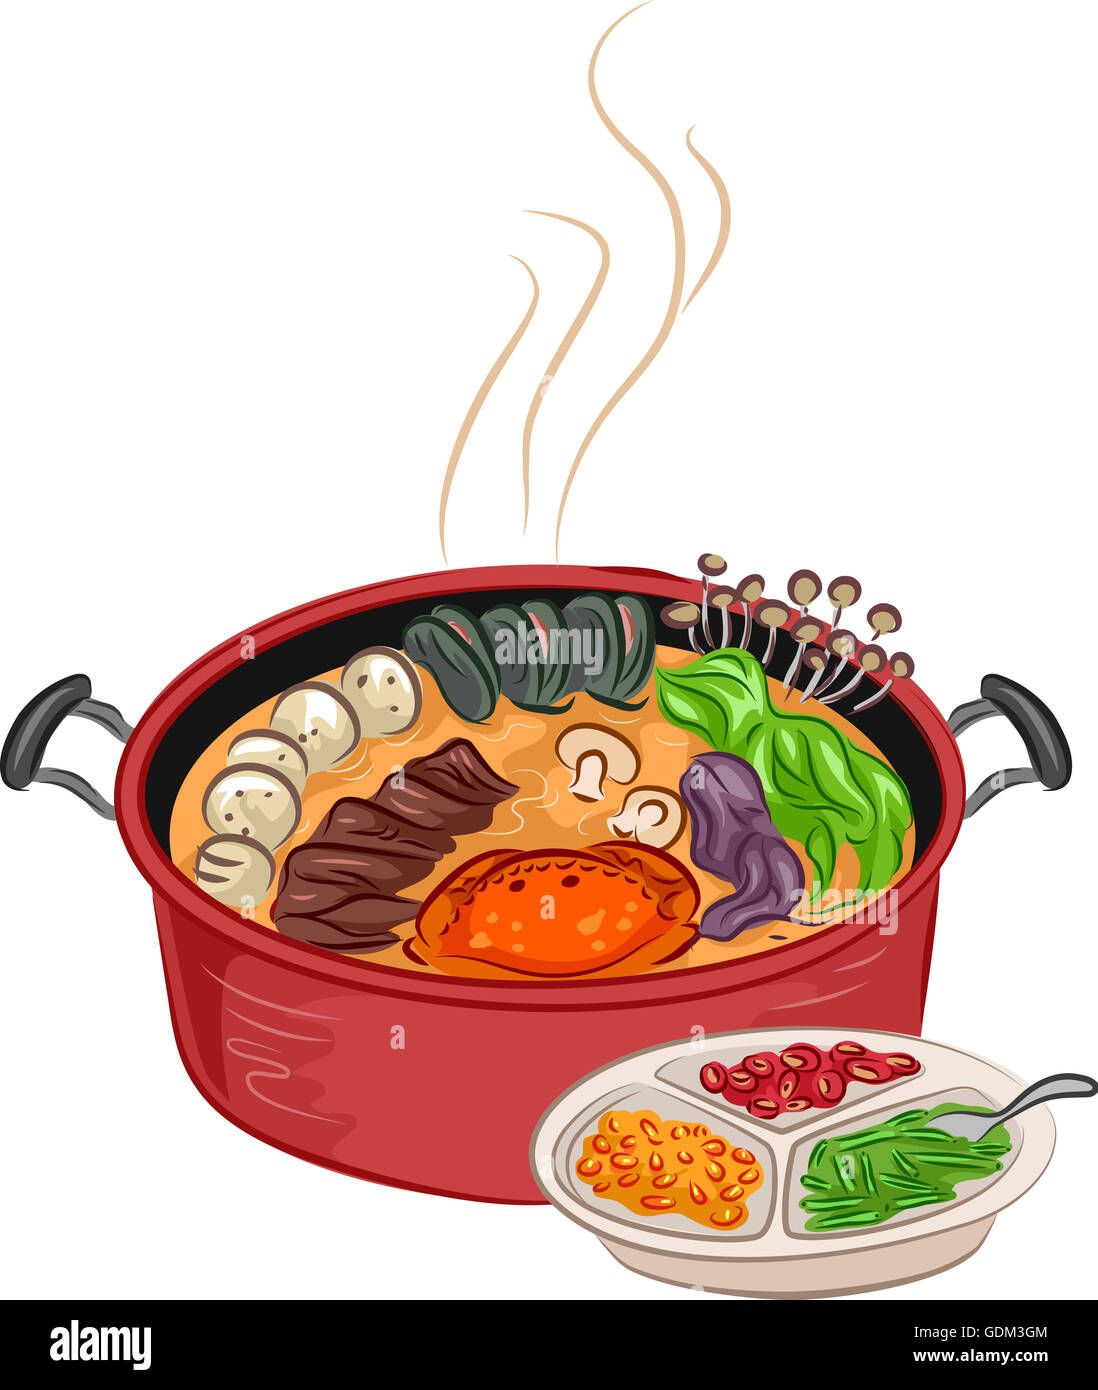 Illustration of a Steaming Hot Pot With Additional Ingredients Sitting Beside It Stock Photo